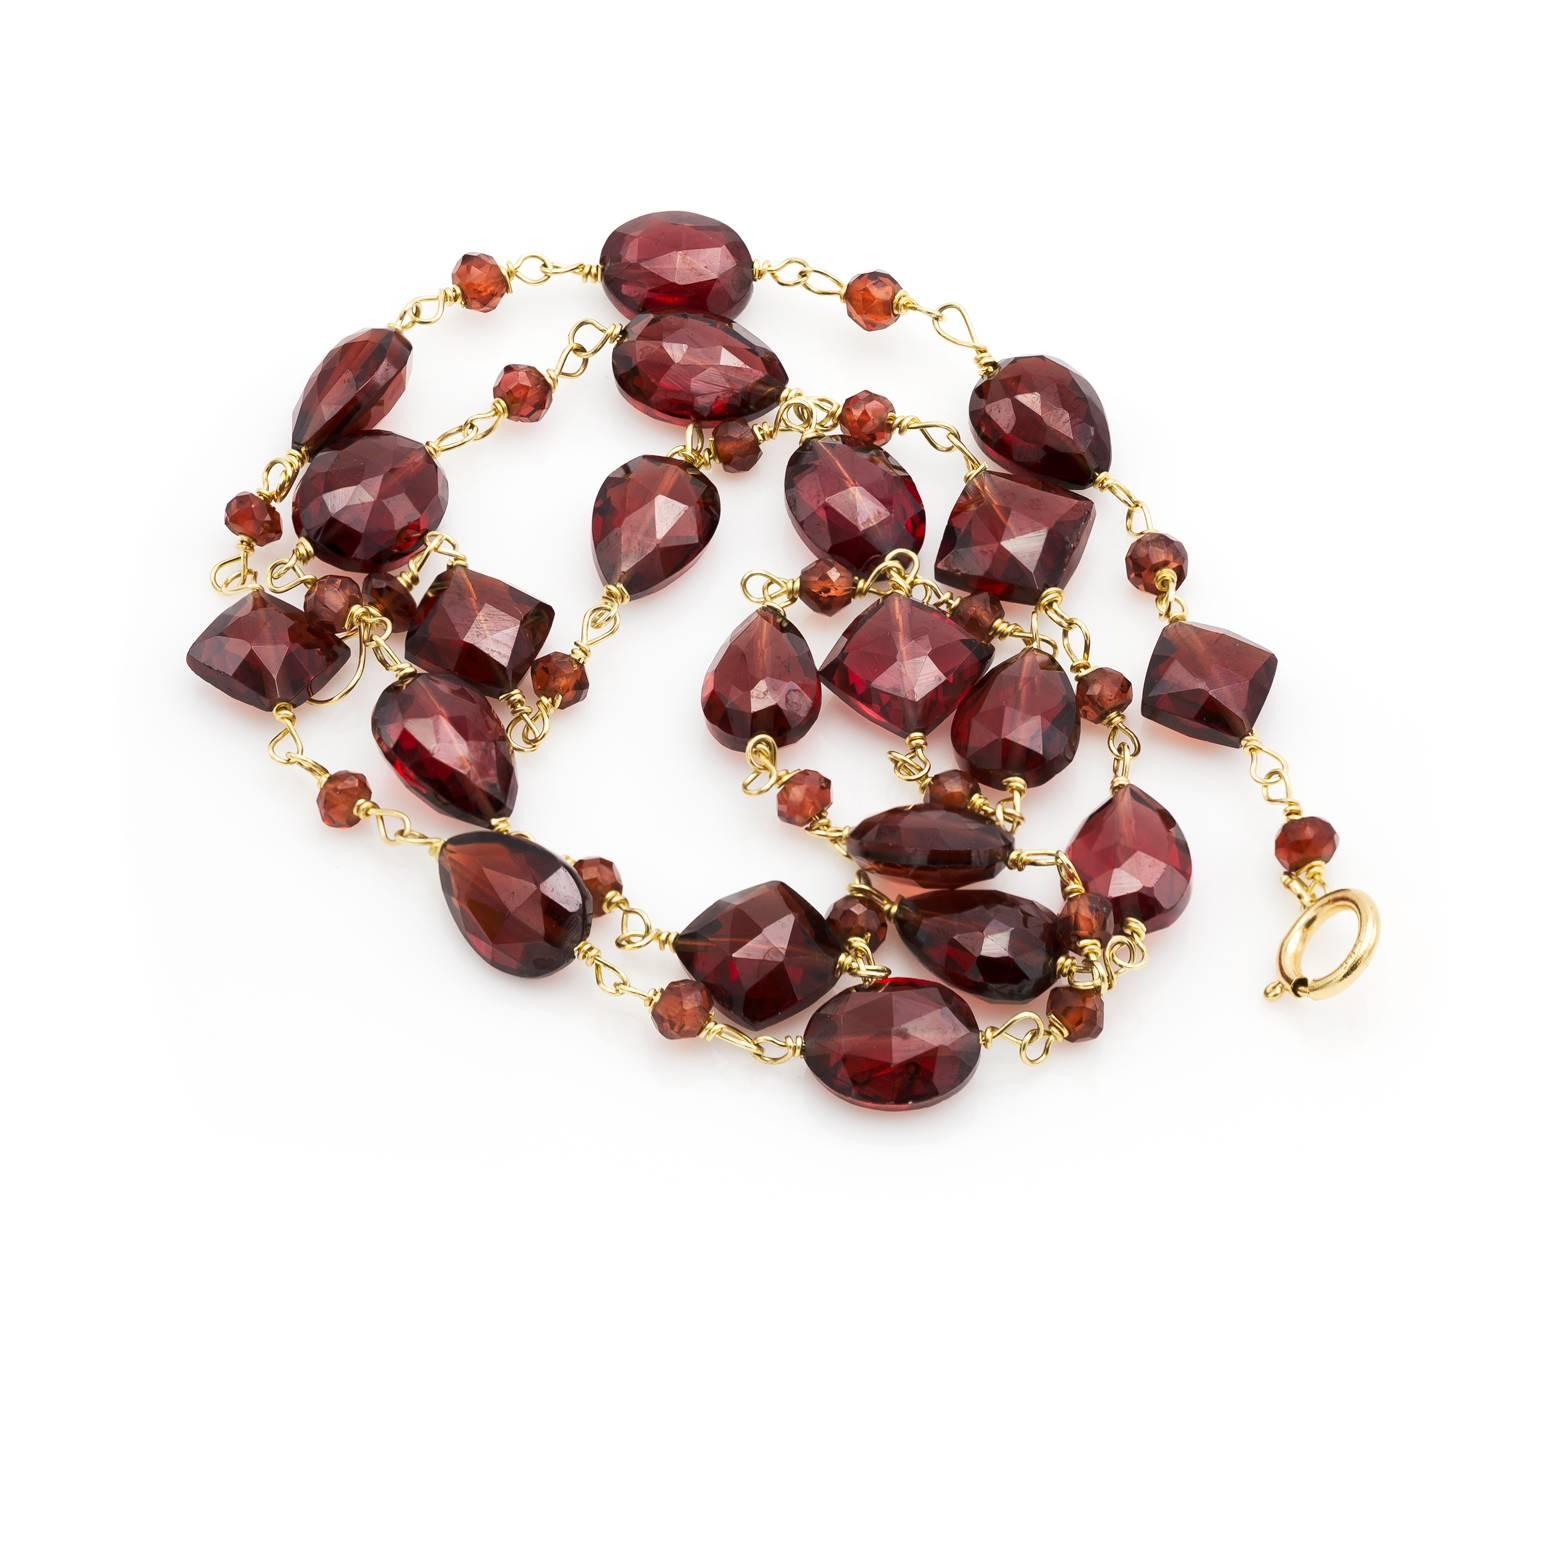 Modern Faceted Garnet Bead Necklace in Gold with Tear Shapes, Squares, and Ovals 